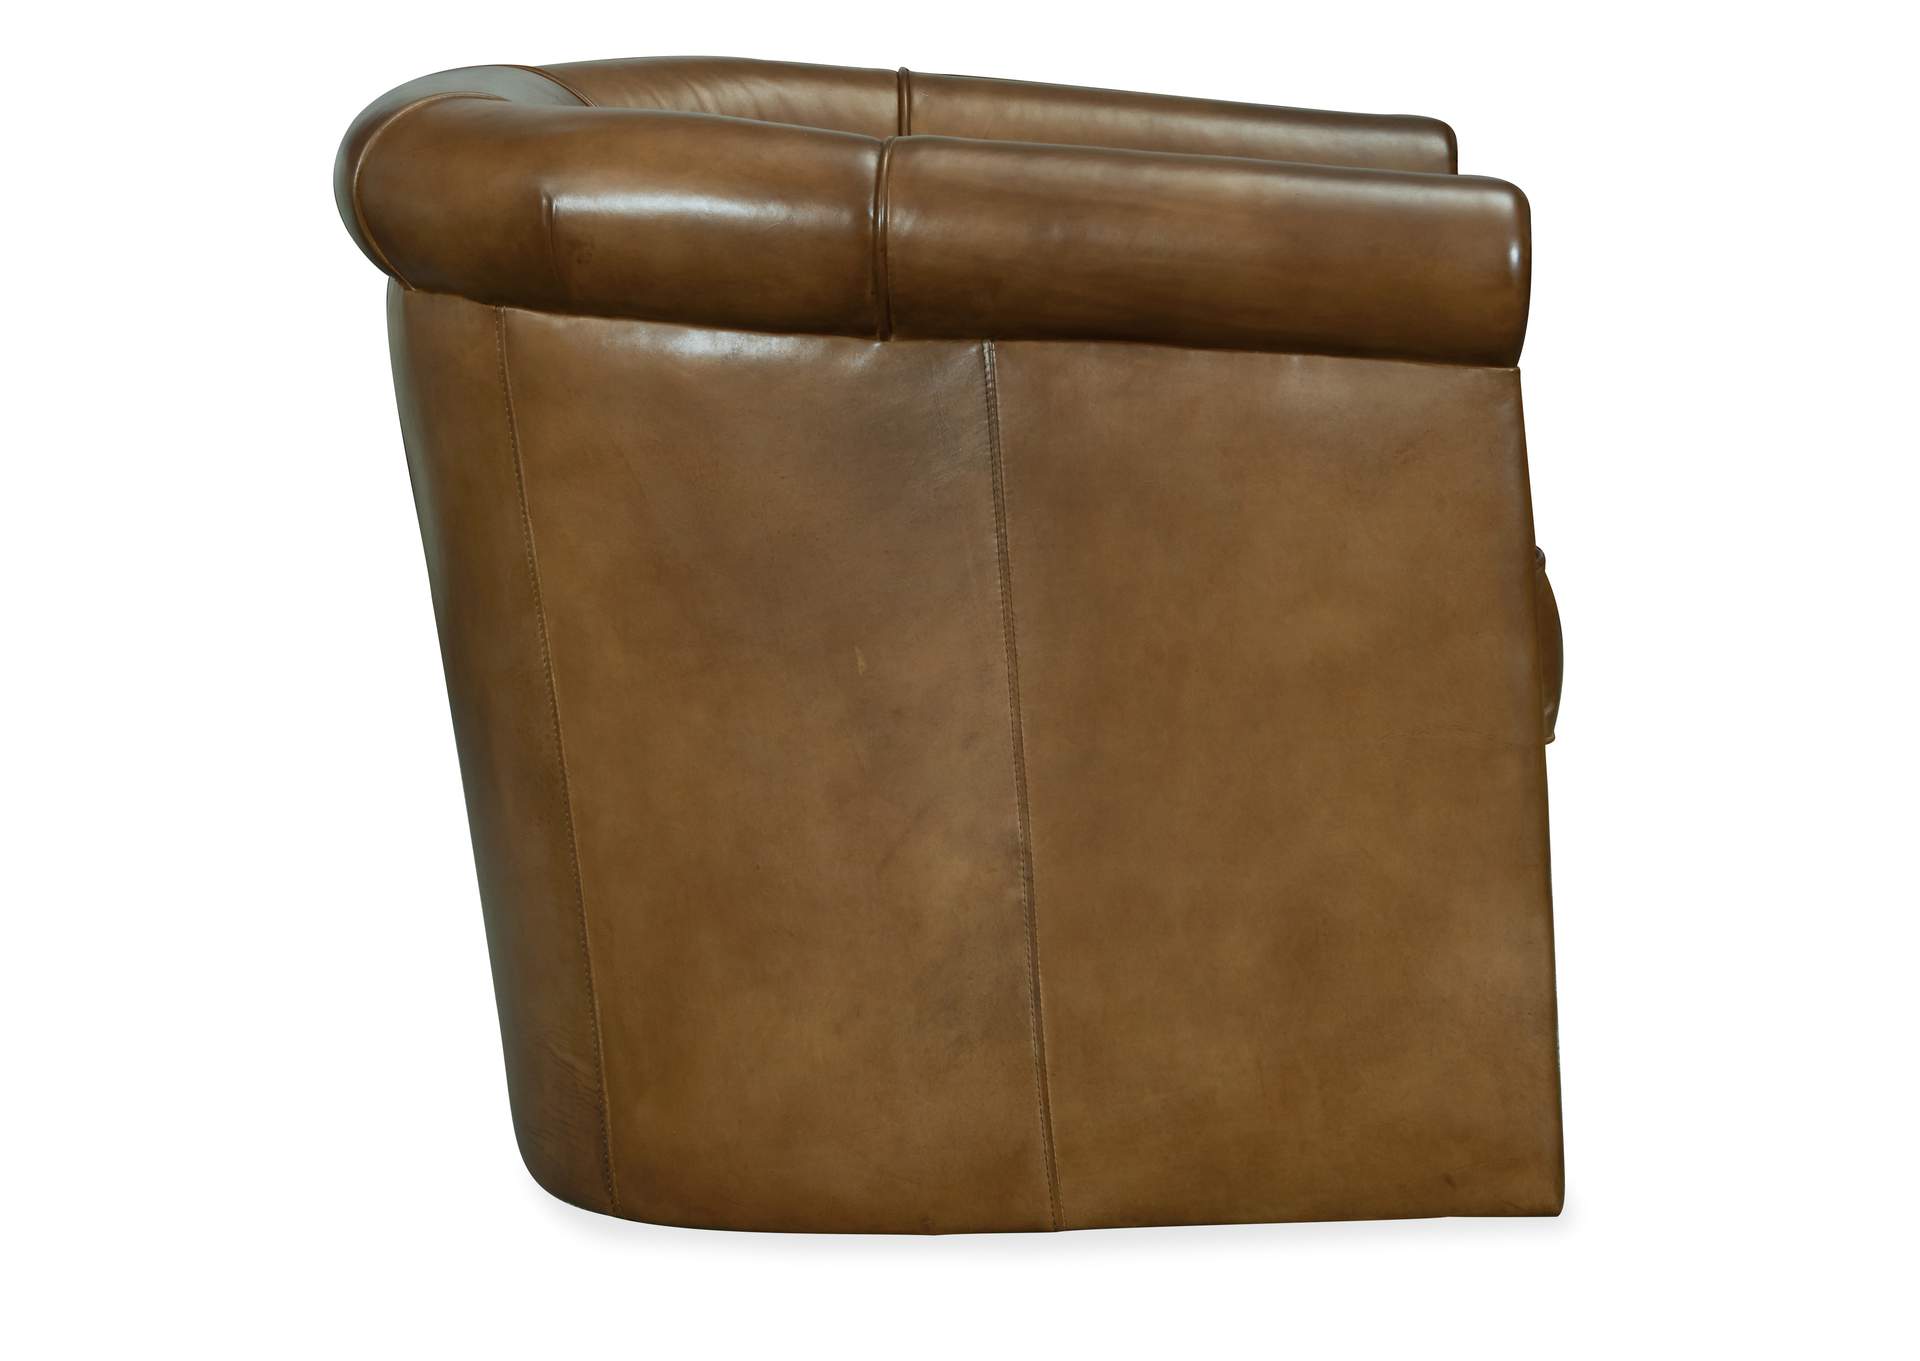 Axton Swivel Leather Club Chair,Hooker Furniture